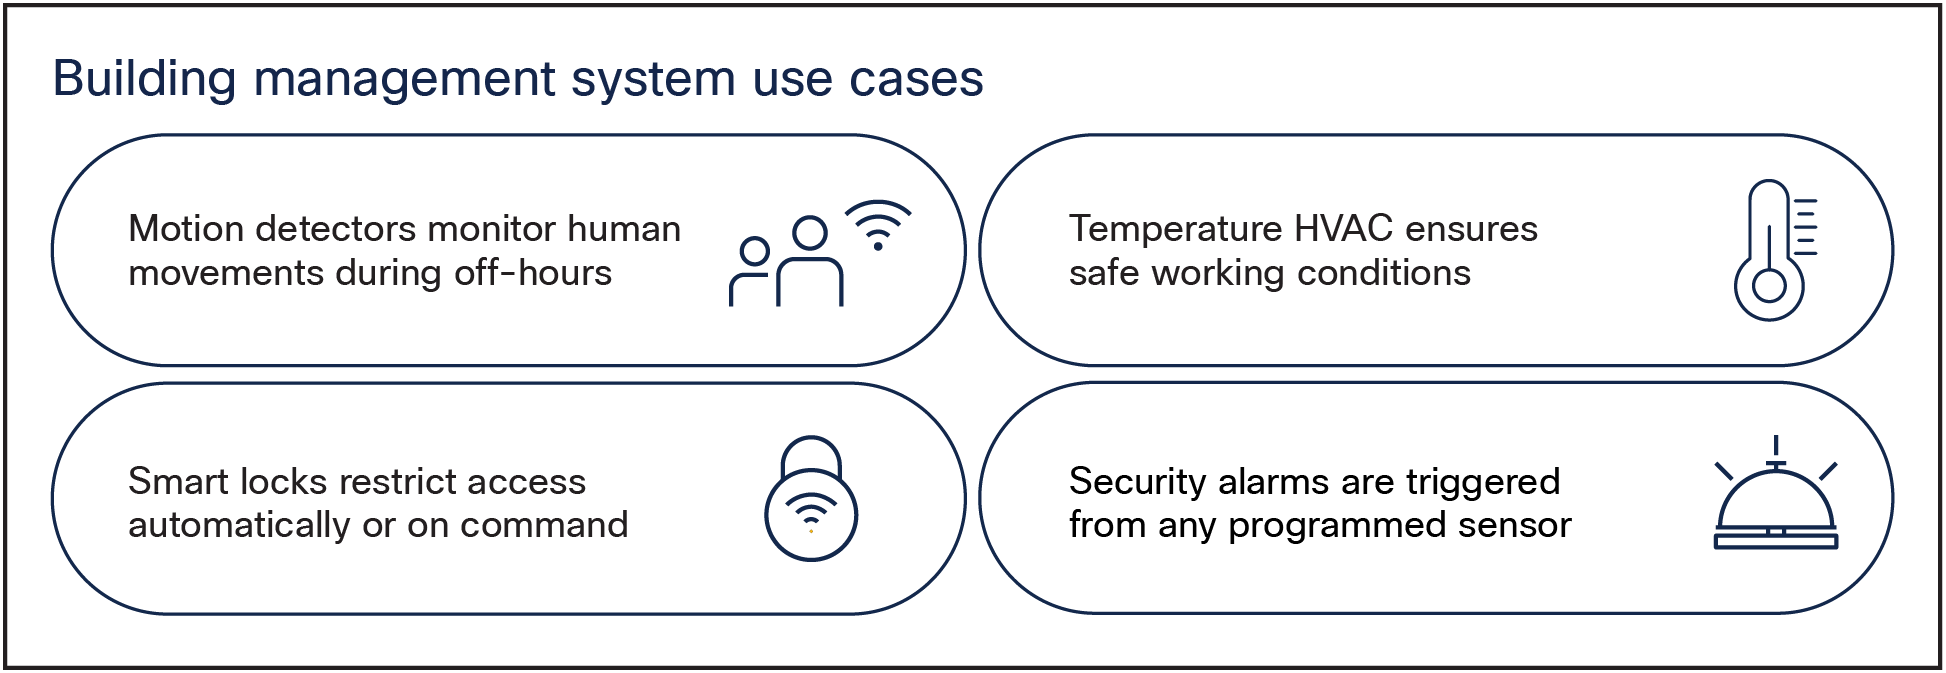 Building management system use cases